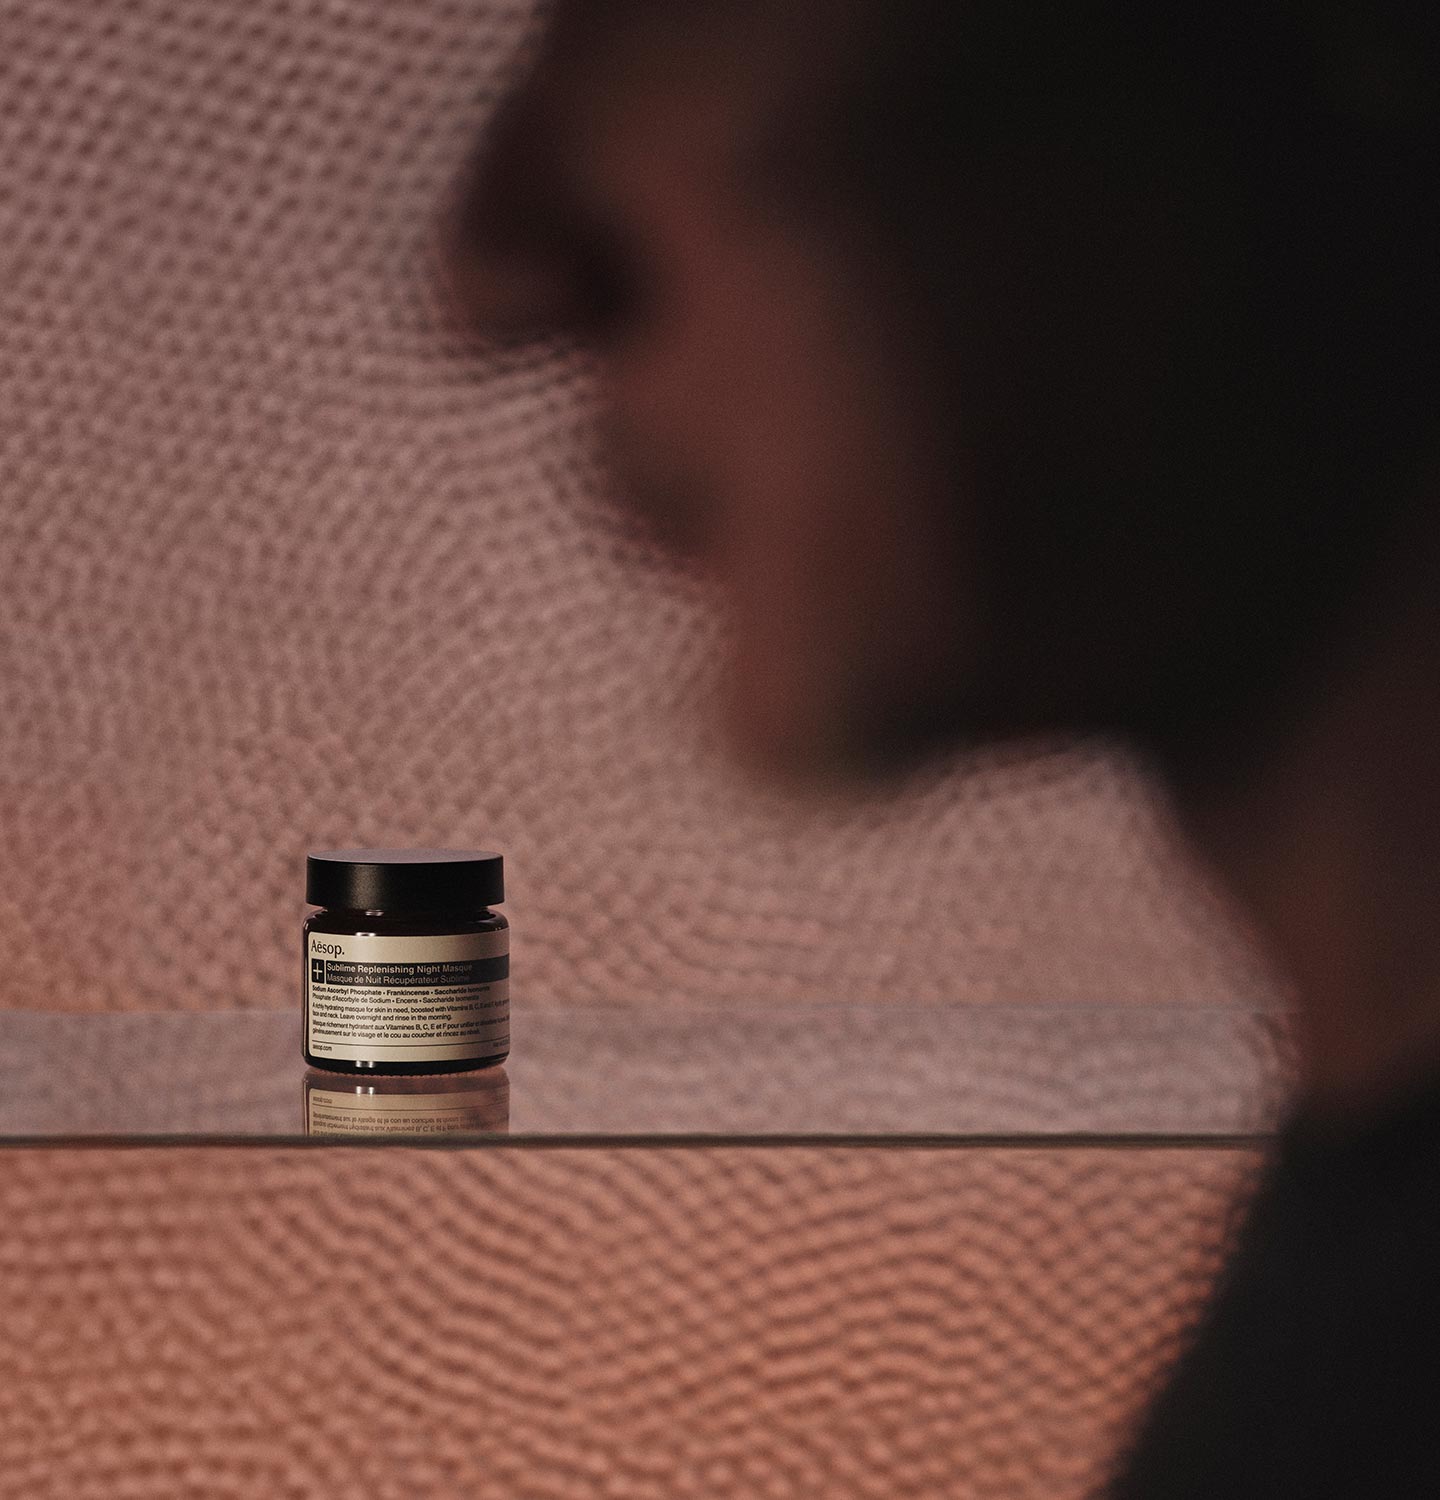 A jar of Sublime Replenishing Night Masque sitting in front of a textured glass window.